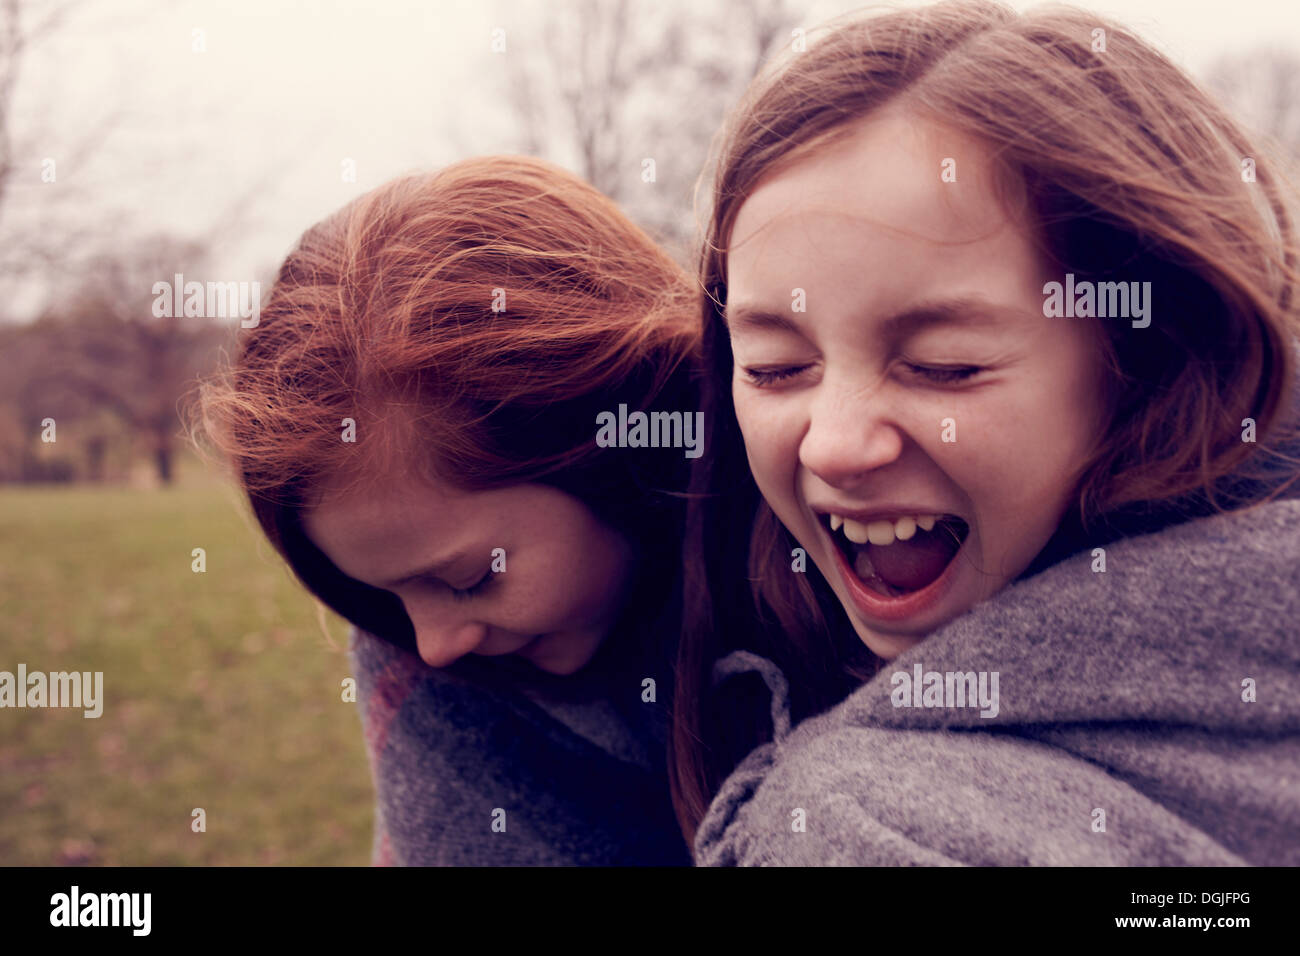 Young friends wrapped in a blanket and laughing outdoors Stock Photo